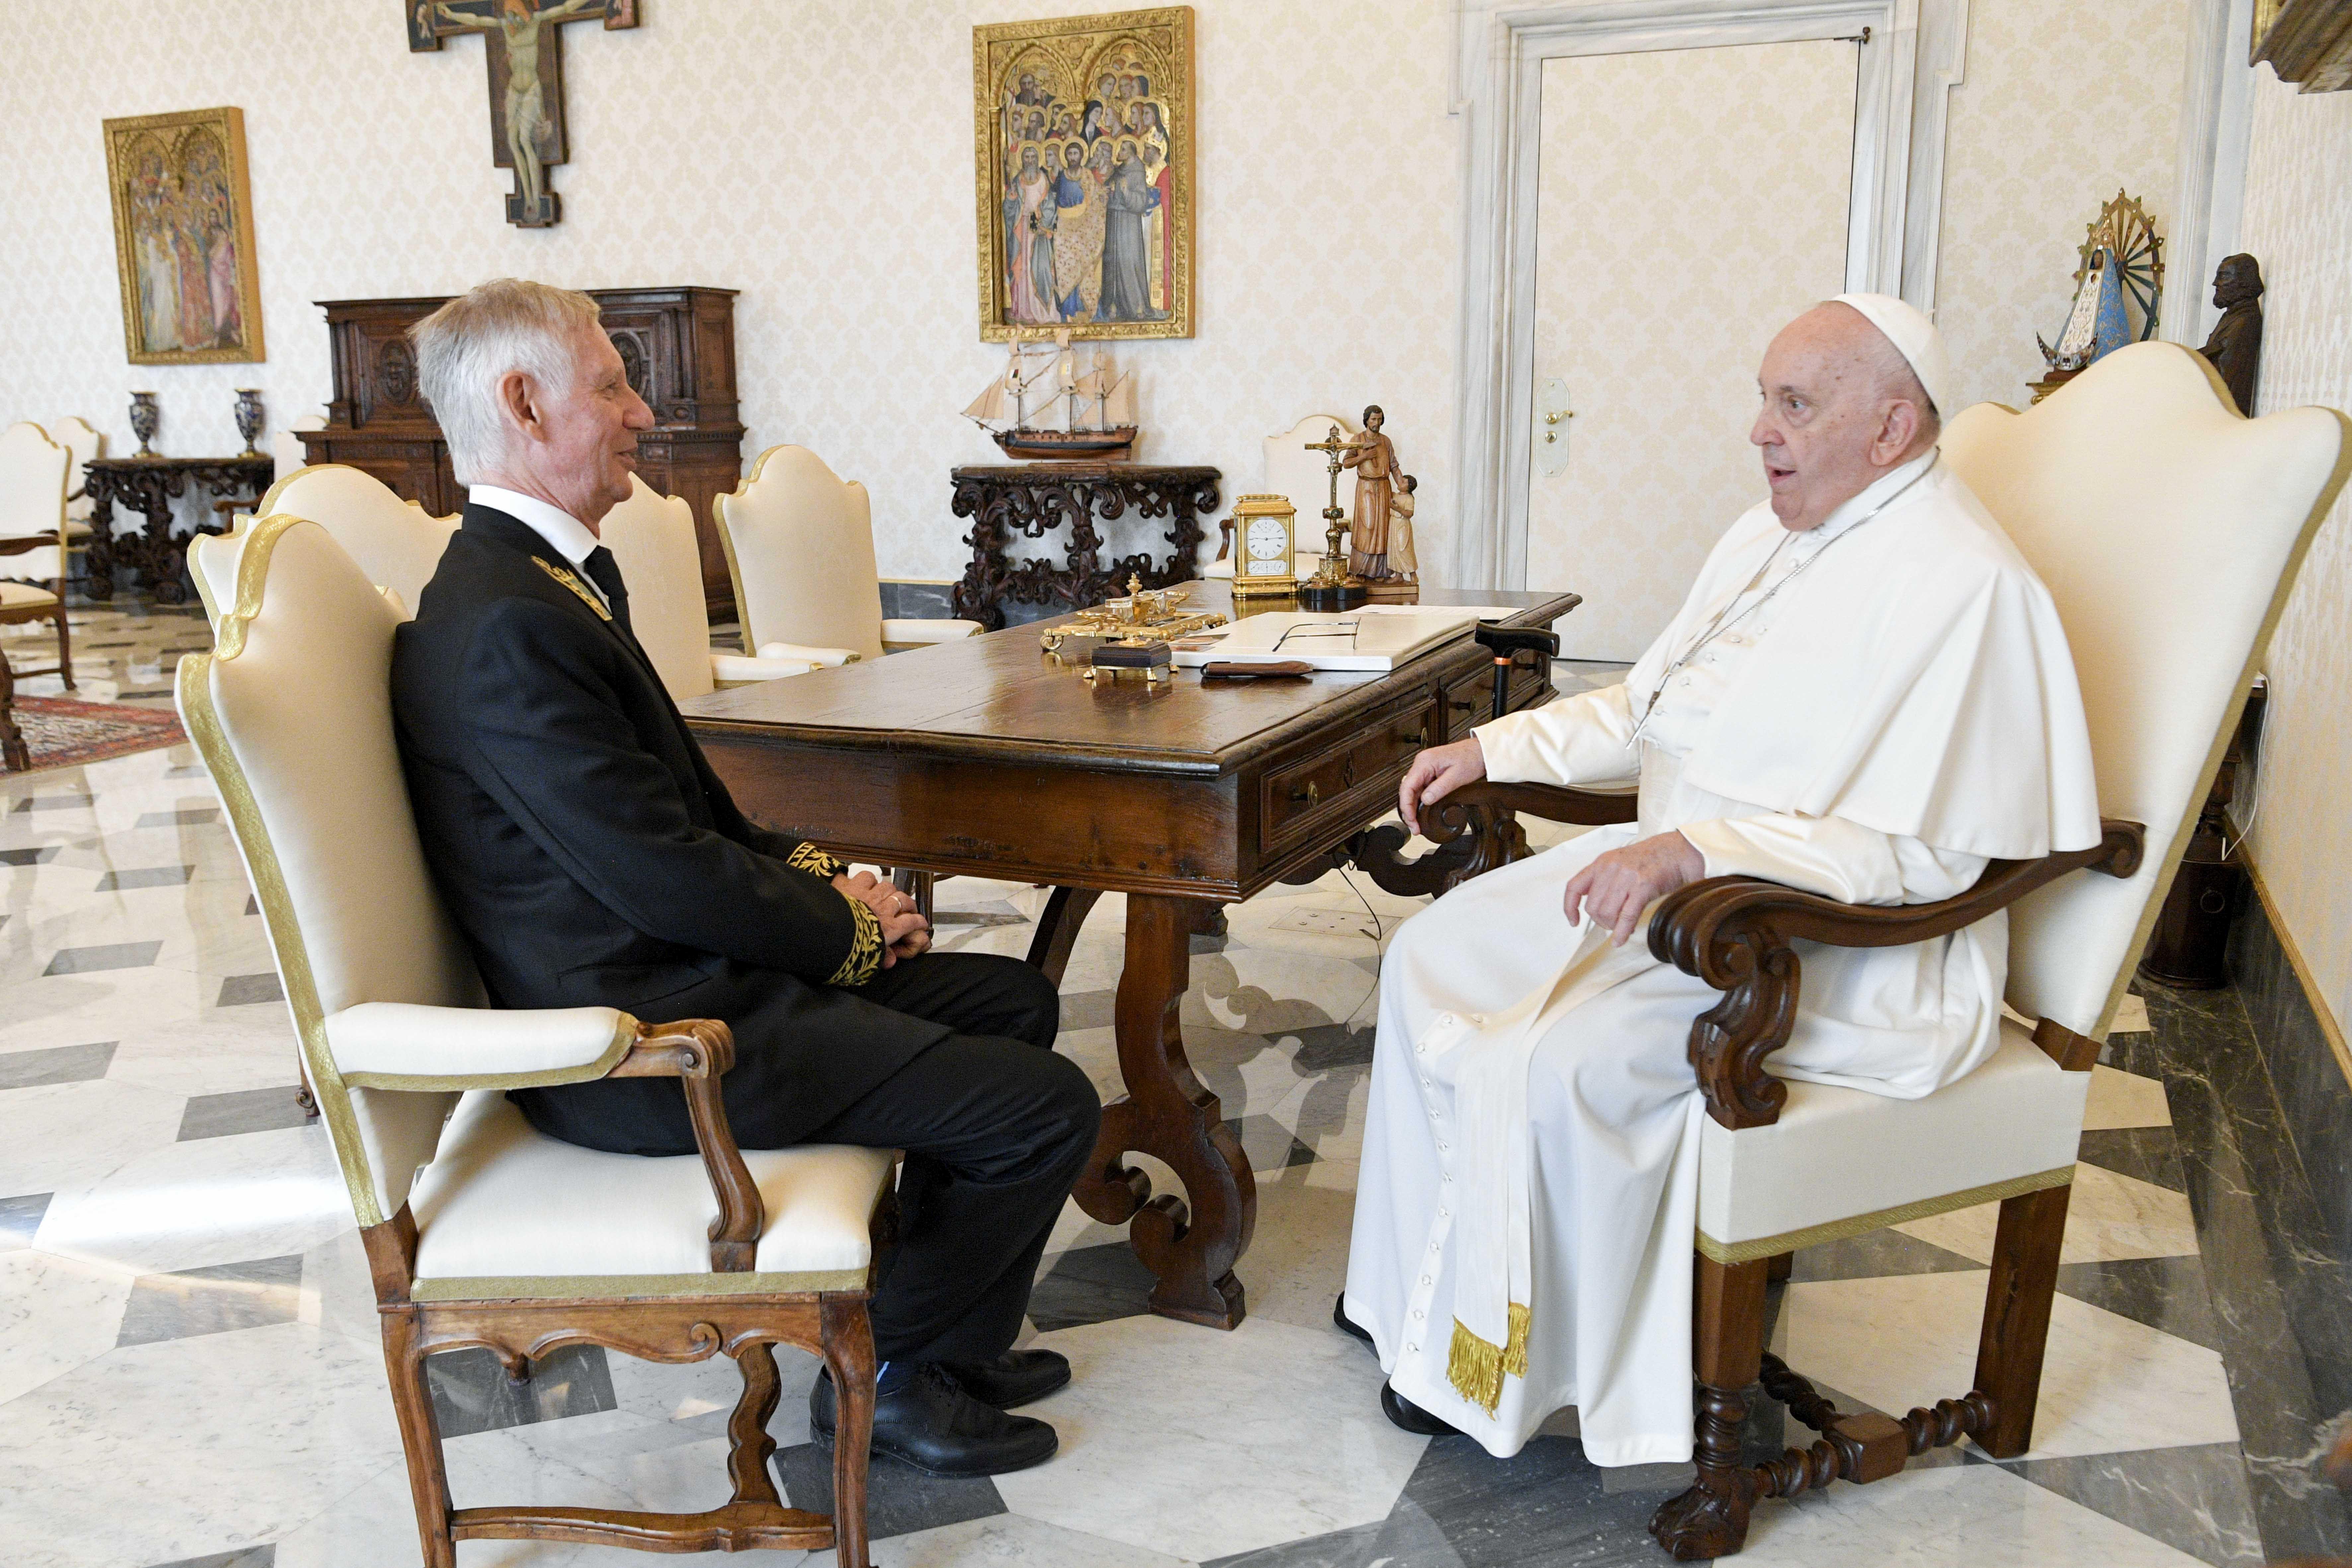 Ambassador Soltanovsky of Russia meets with the Pope